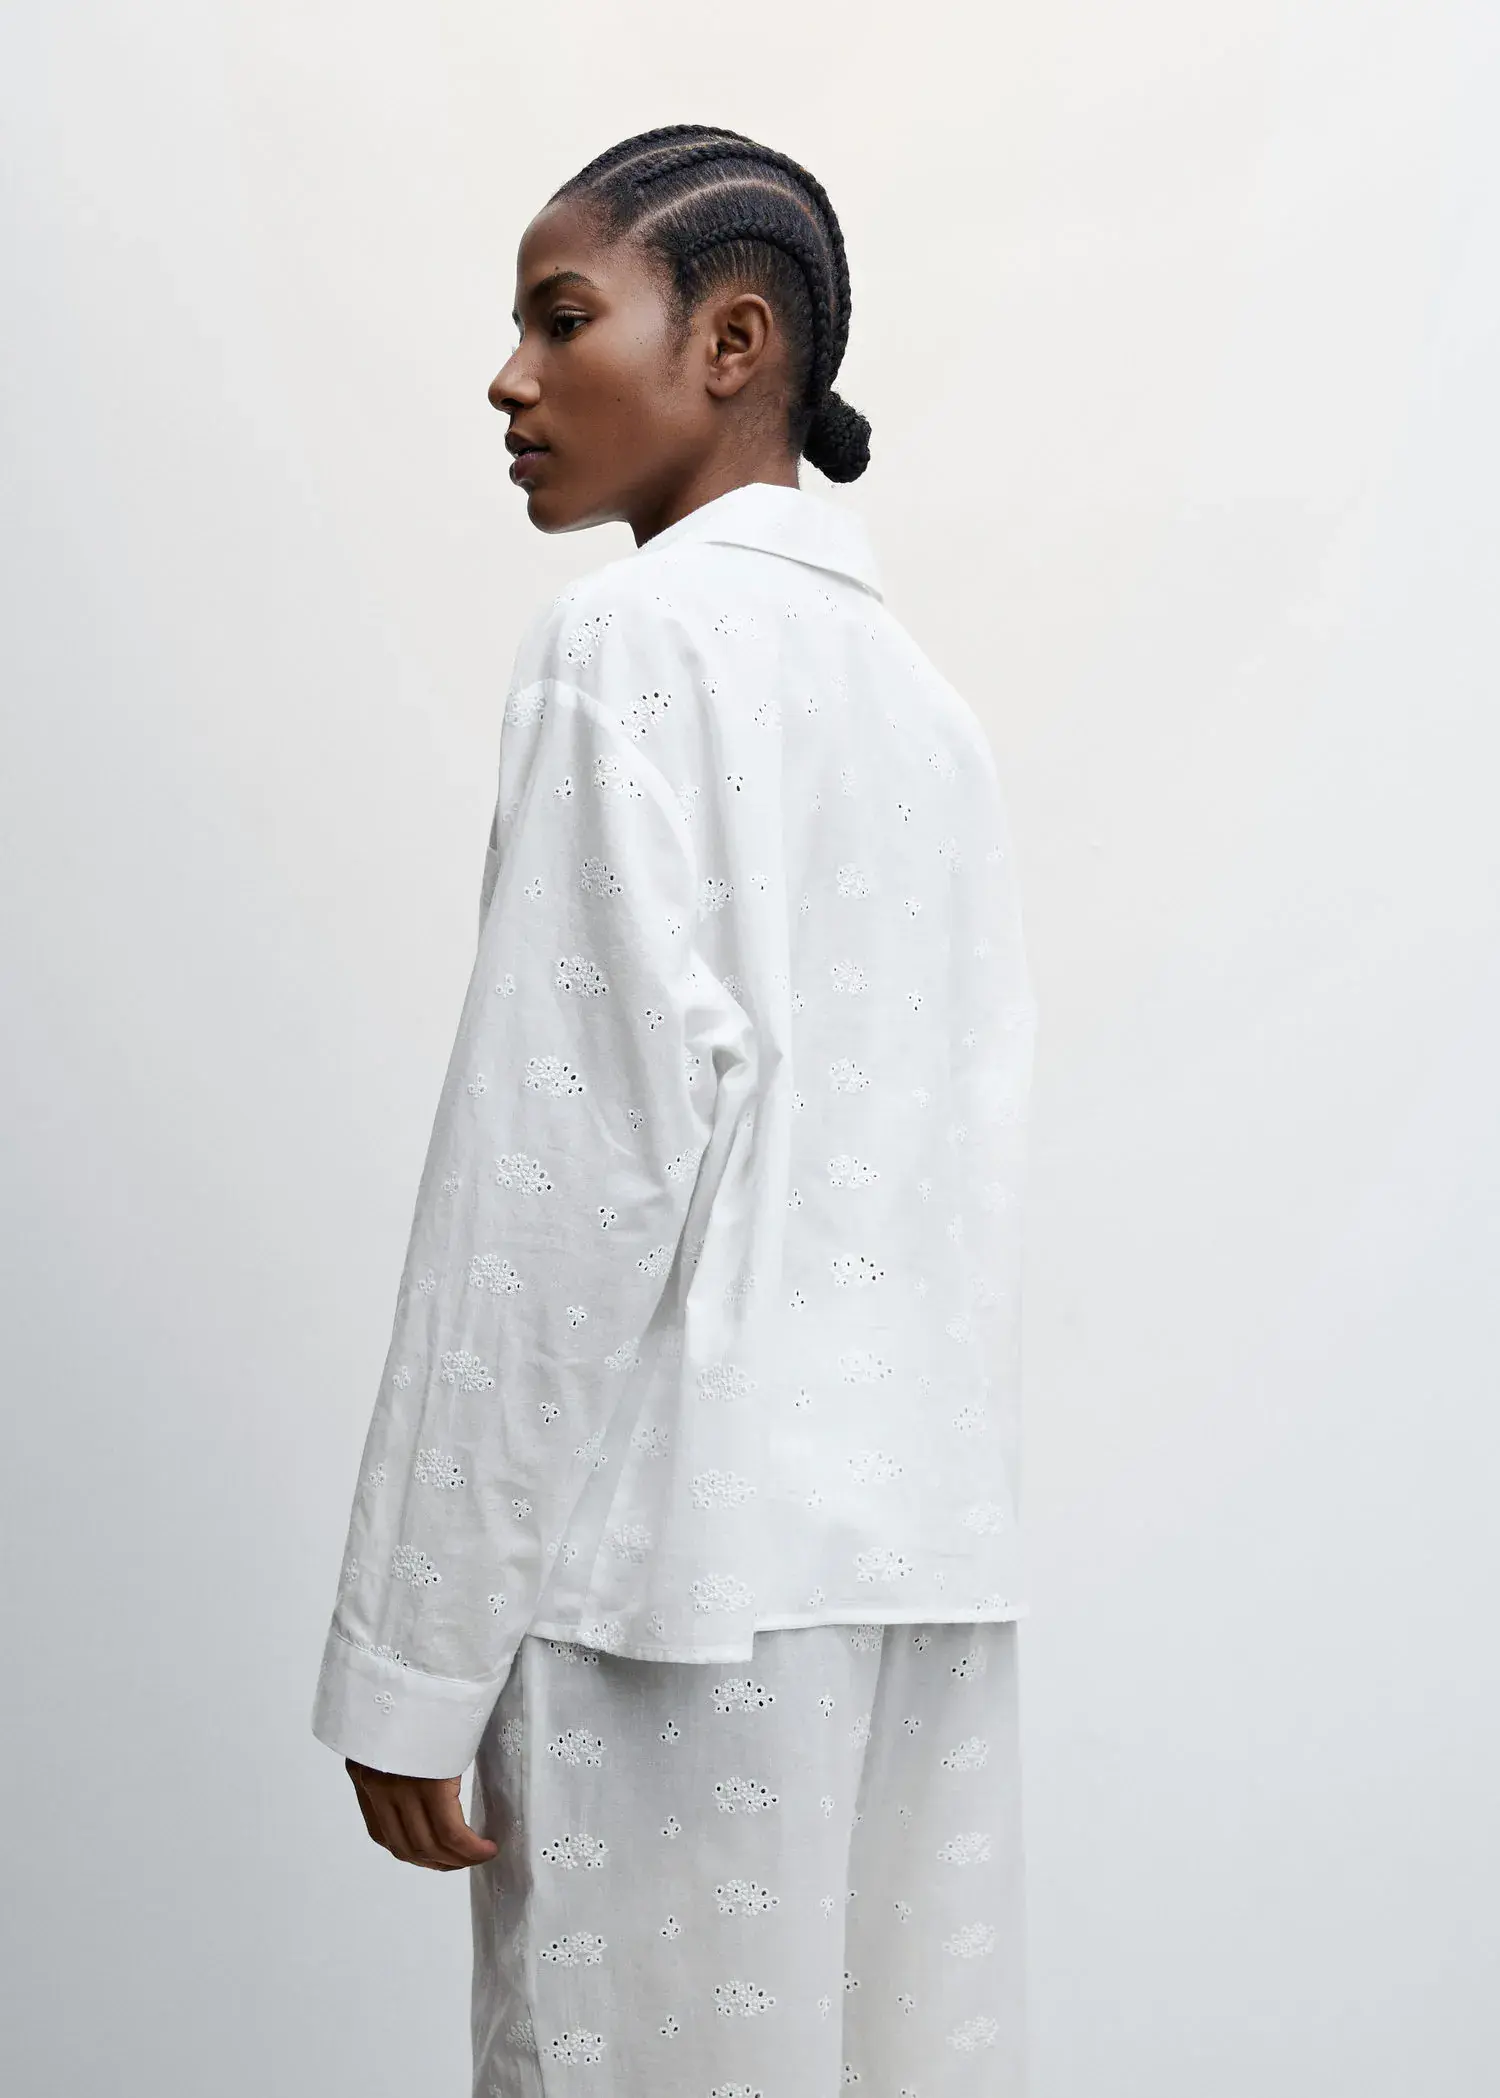 Mango Pyjama shirt with openwork details. a person wearing a white shirt and white pants. 